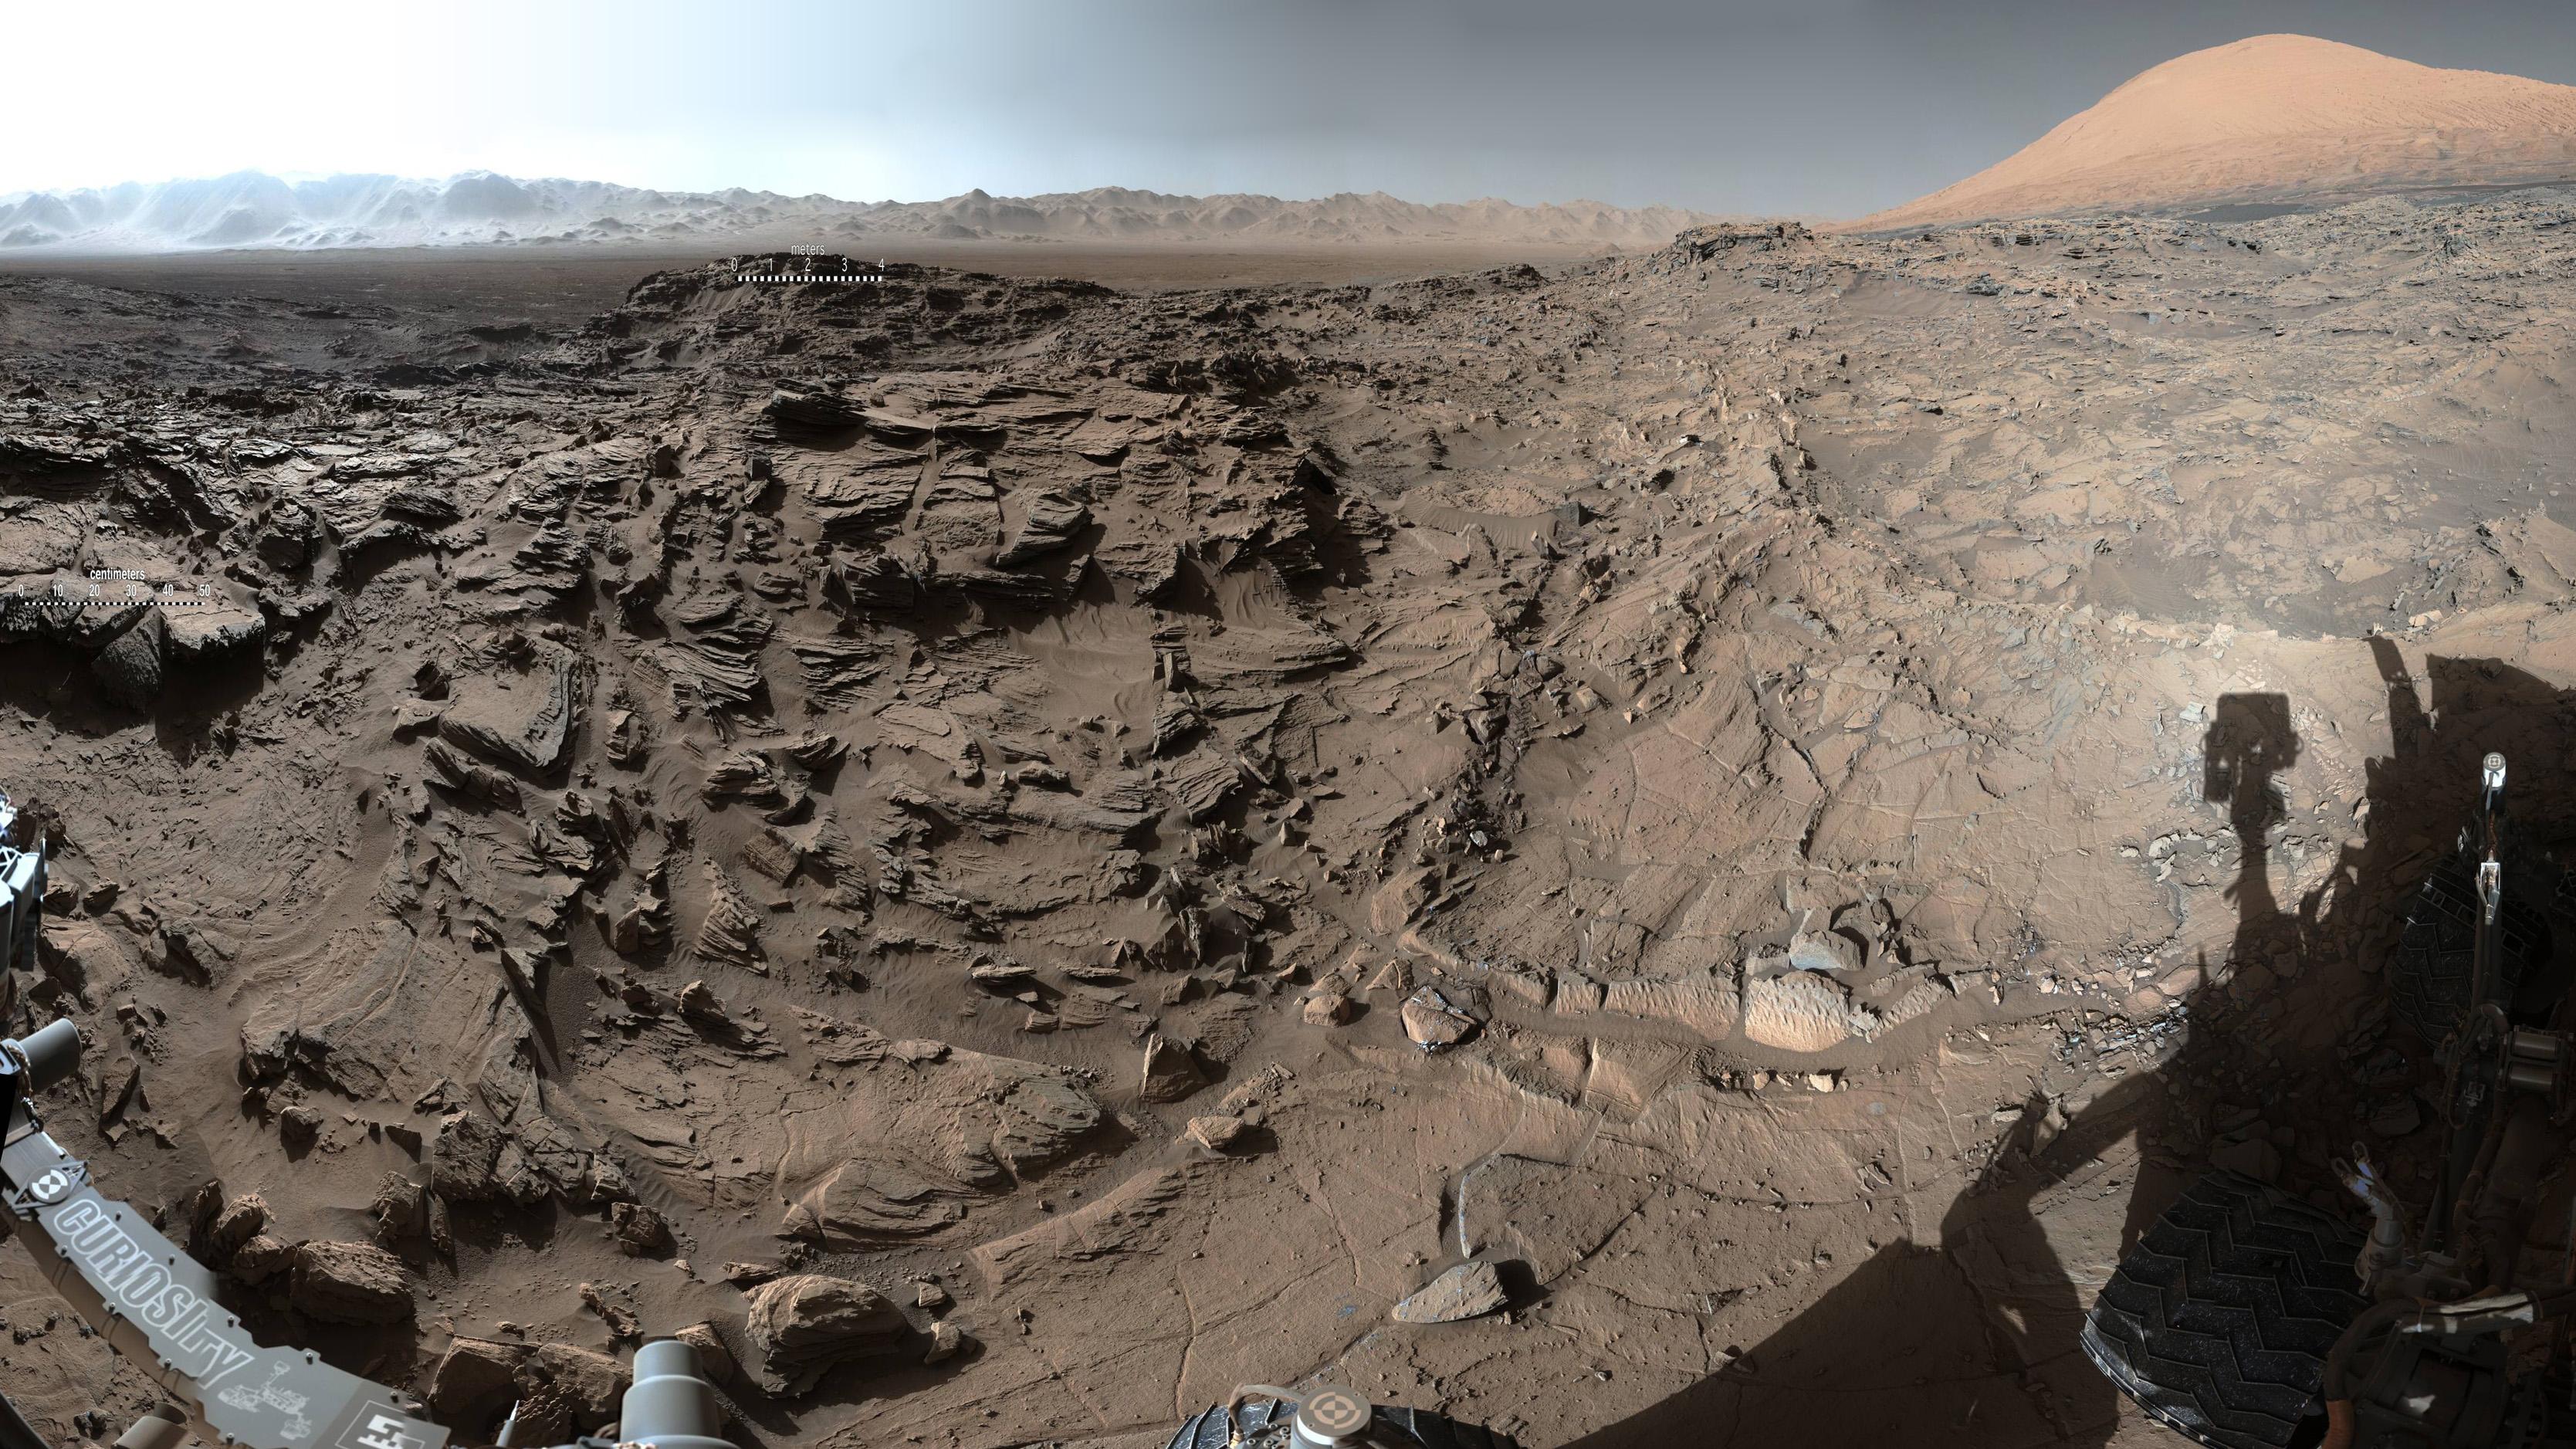 Download the Curiosity Rover Wallpaper, Curiosity Rover iPhone